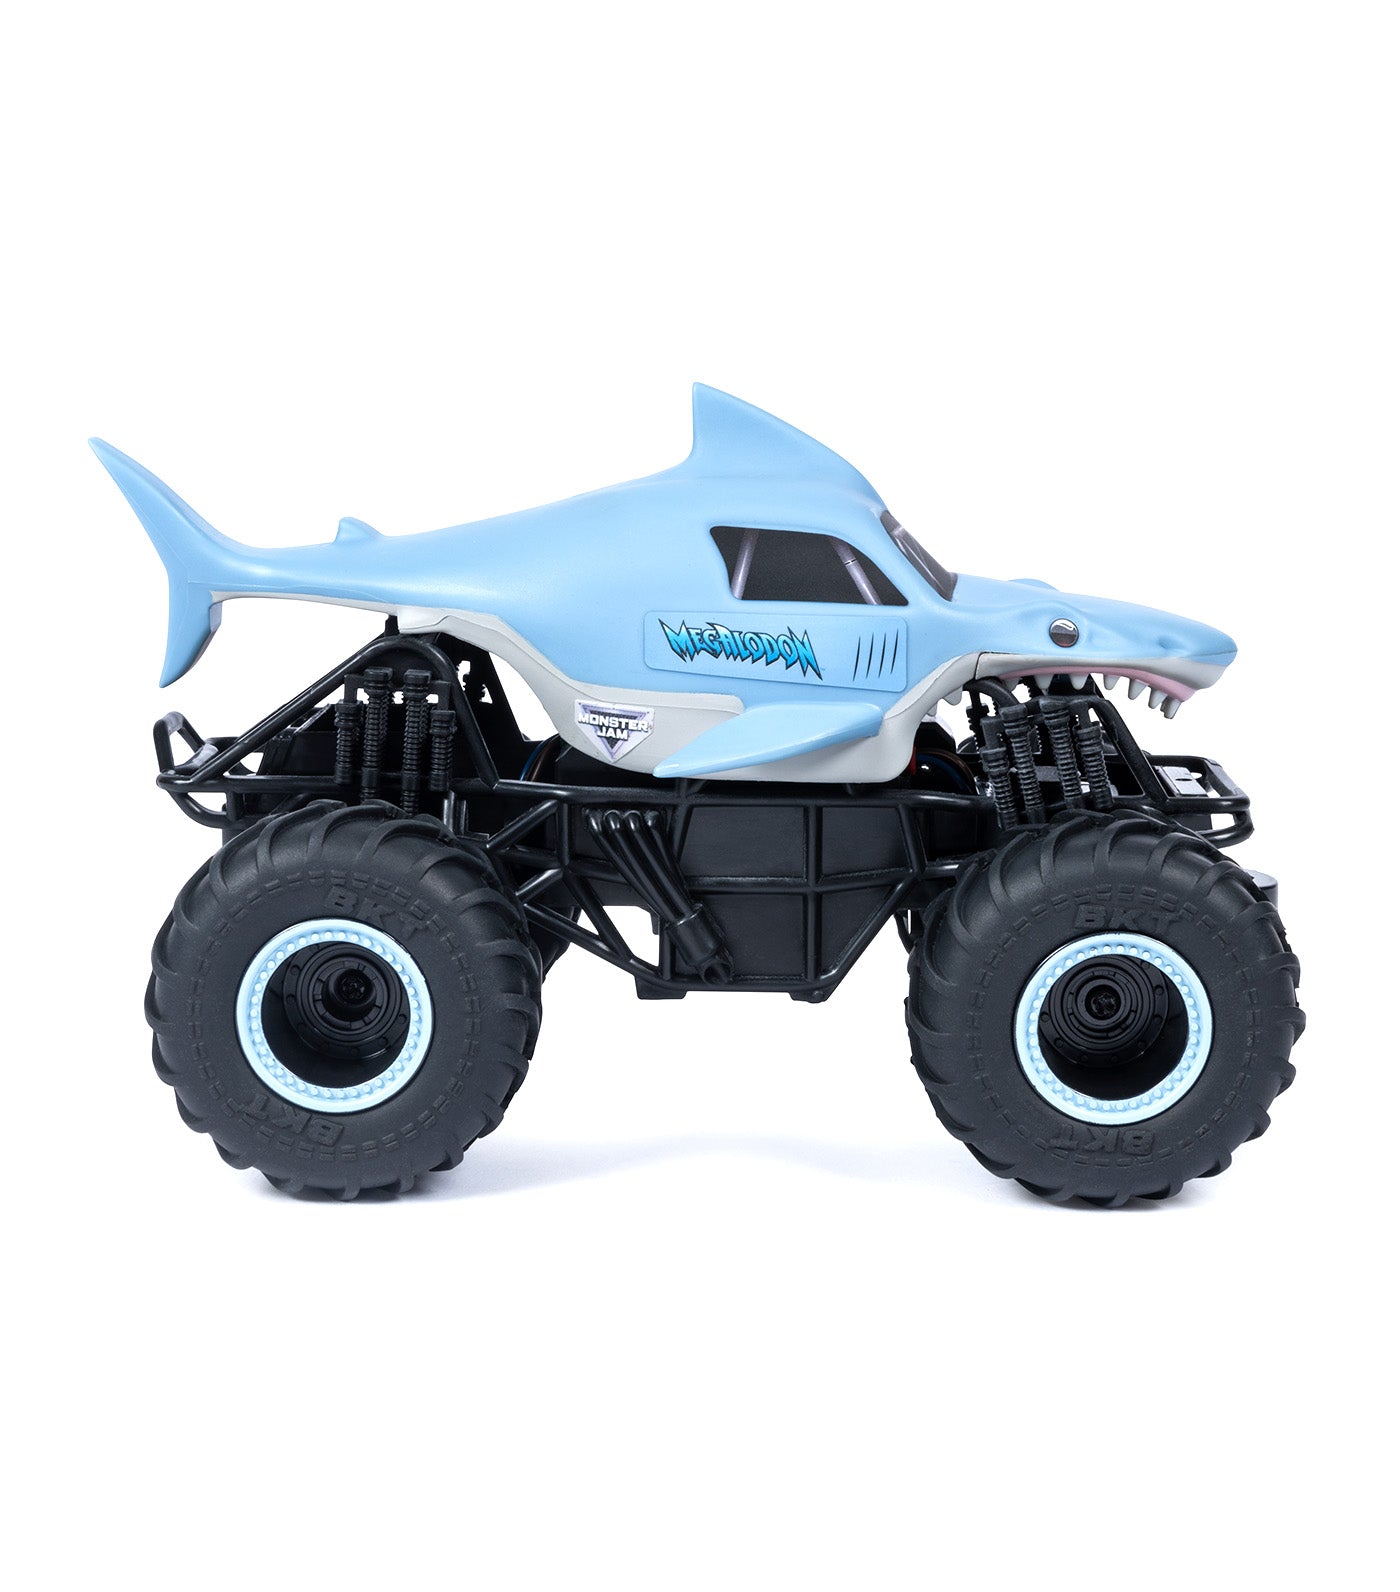 Megalodon Remote Control Monster Truck